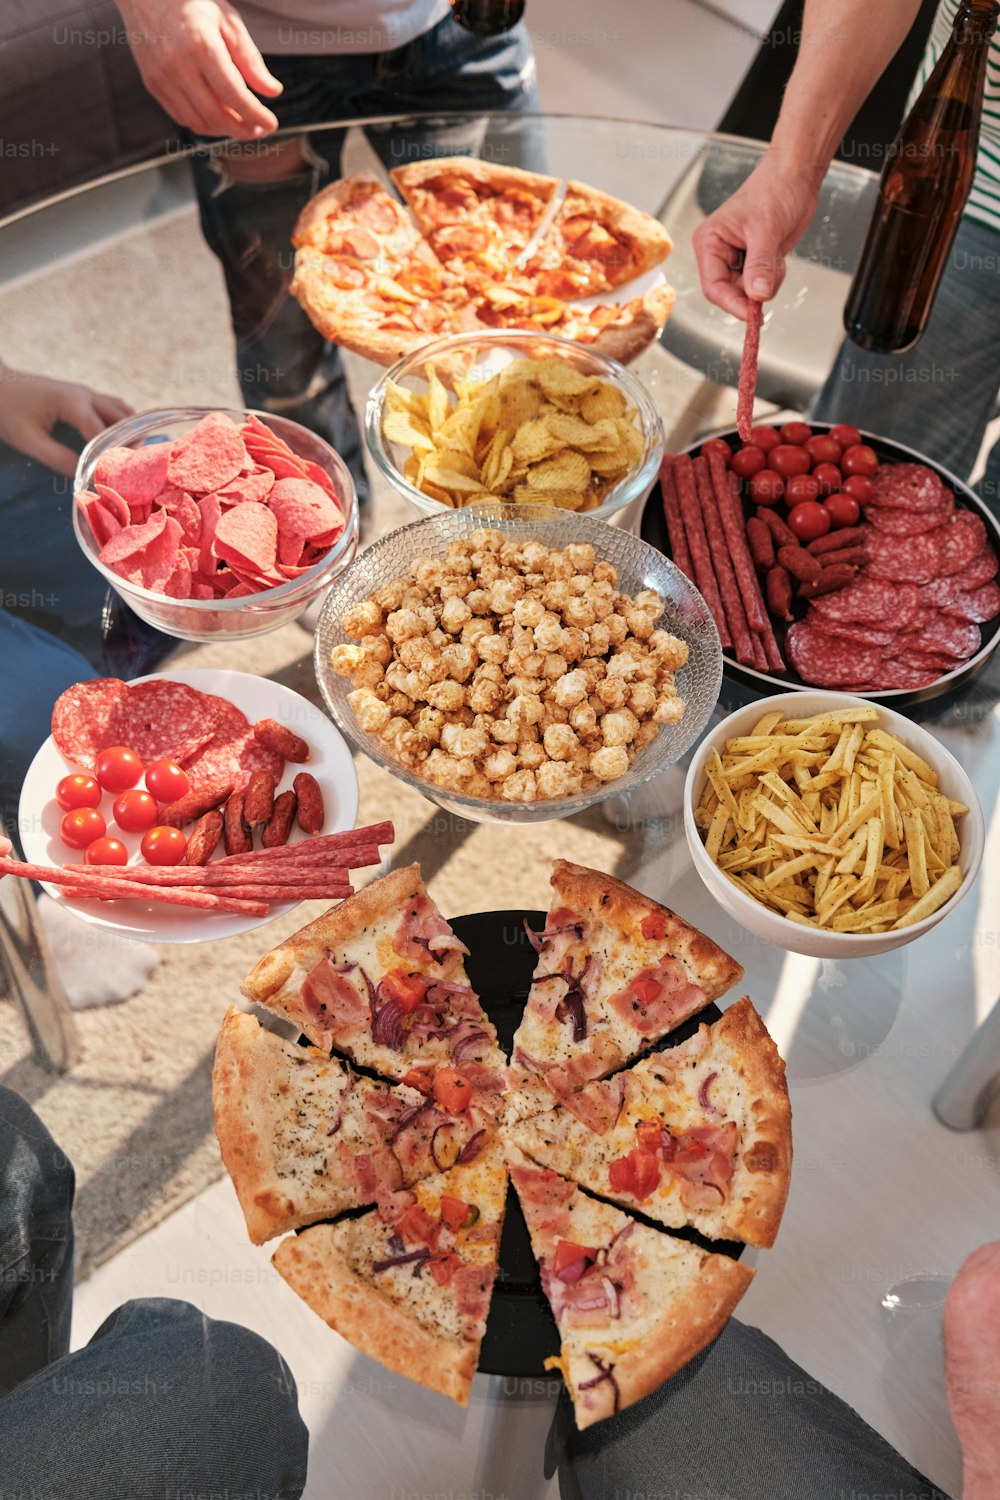 a table topped with lots of different types of food